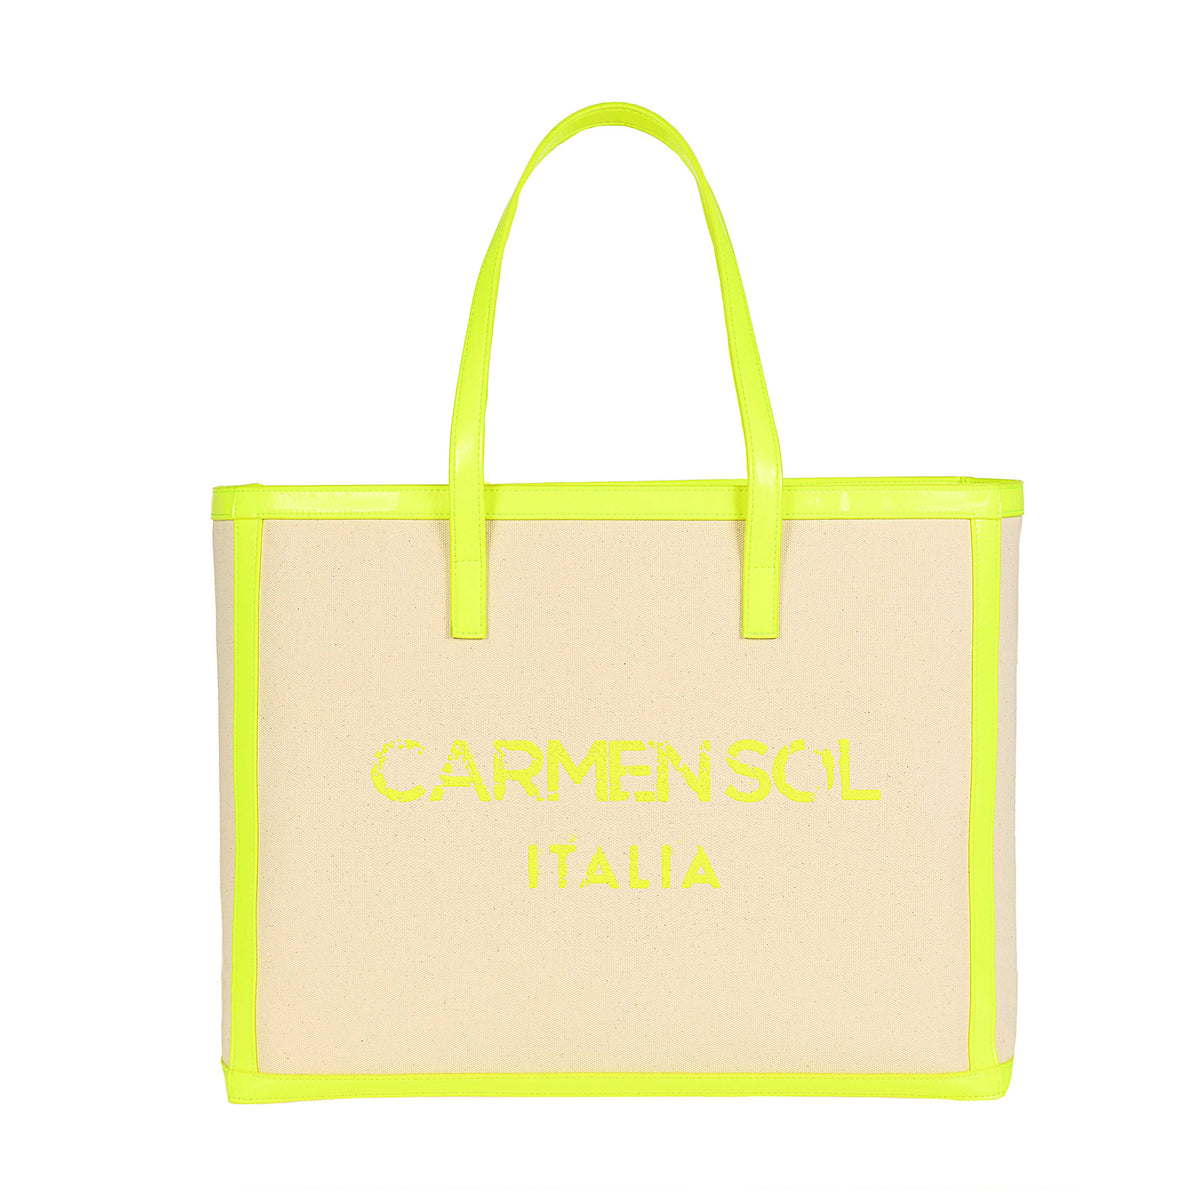 Vegan Carmen Sol large tote bags made from canvas material in color neon yellow